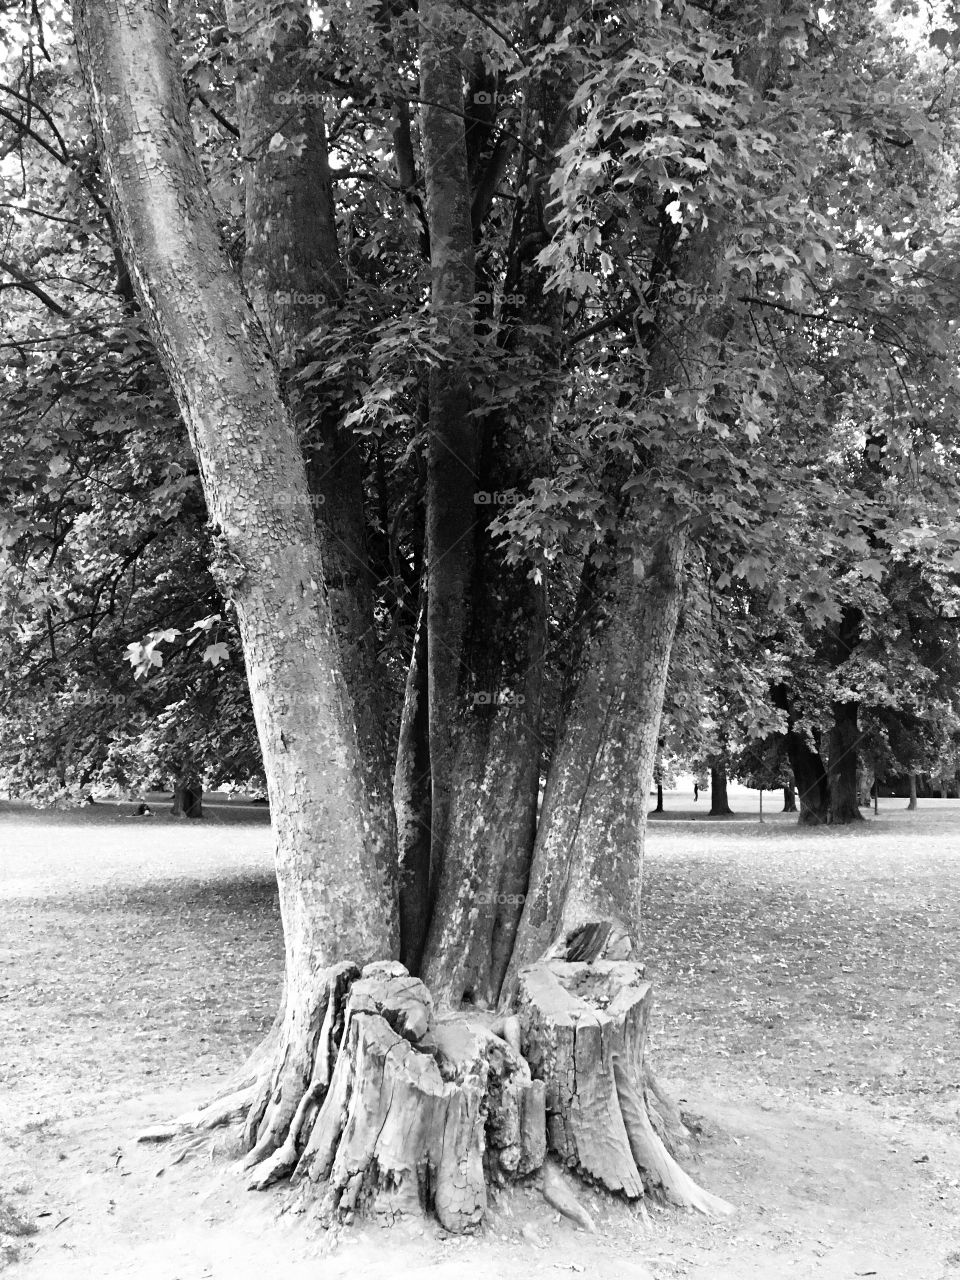 A tree in the middle of the park